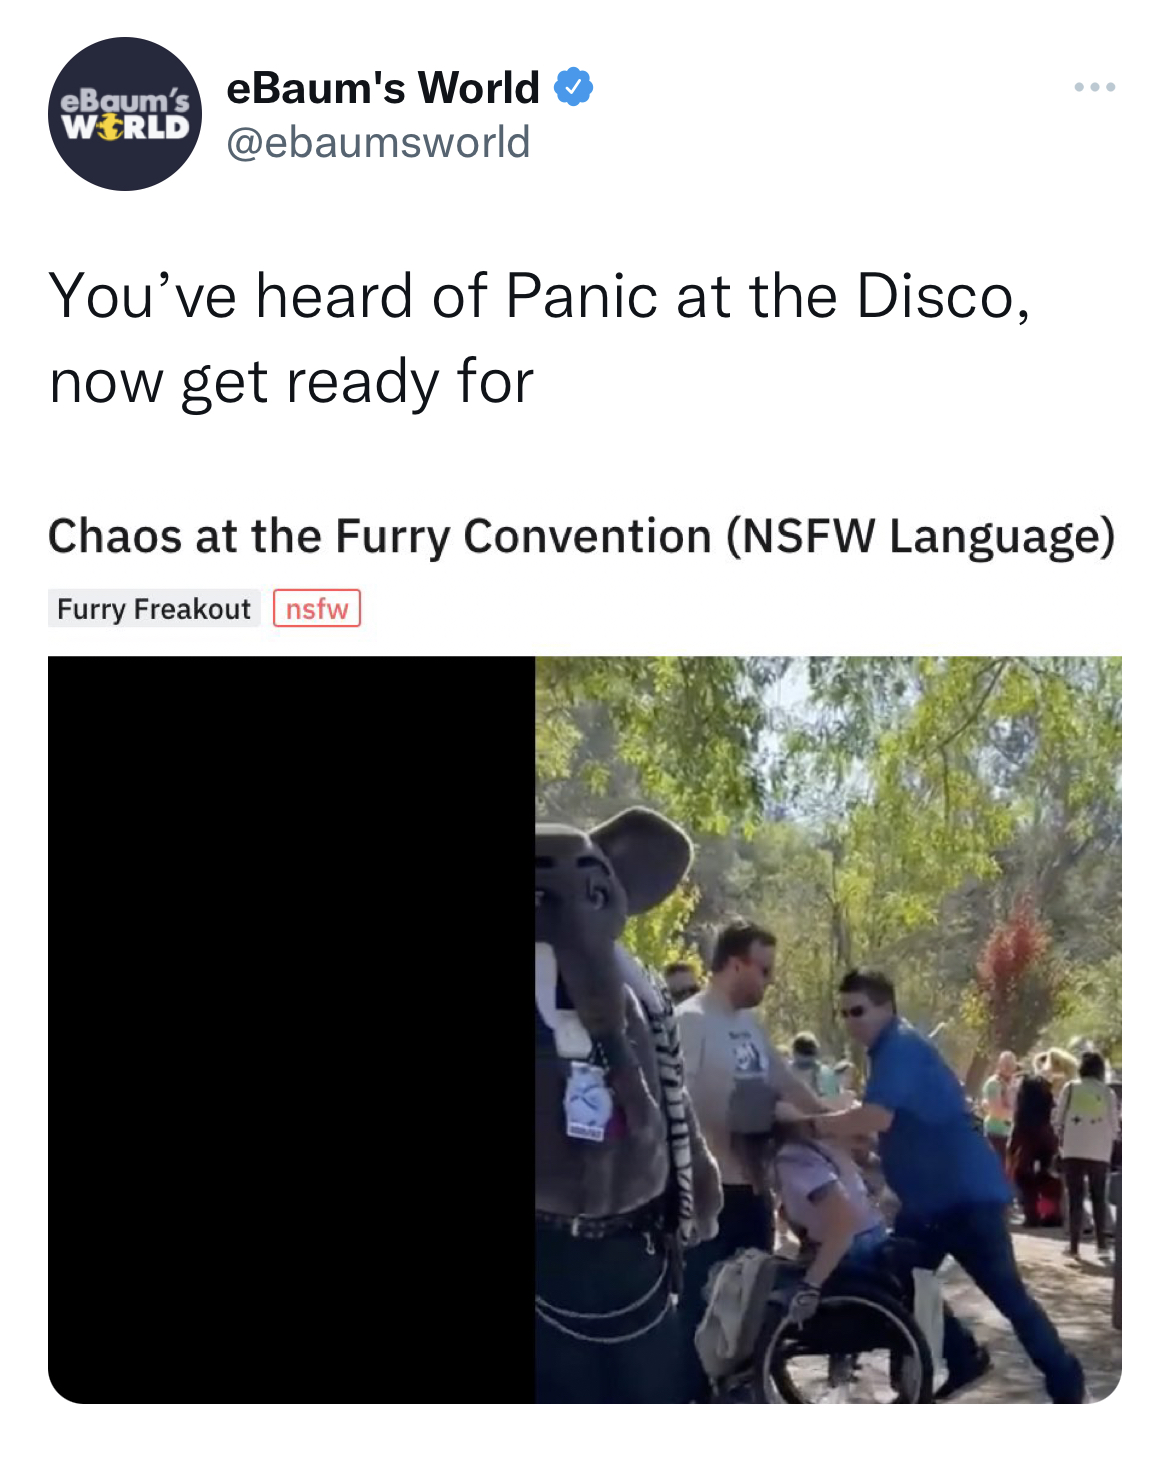 Savage and funny tweets - communication - Boum's eBaum's World Werld You've heard of Panic at the Disco, now get ready for Chaos at the Furry Convention Nsfw Language Furry Freakout nsfw 201 Nougall